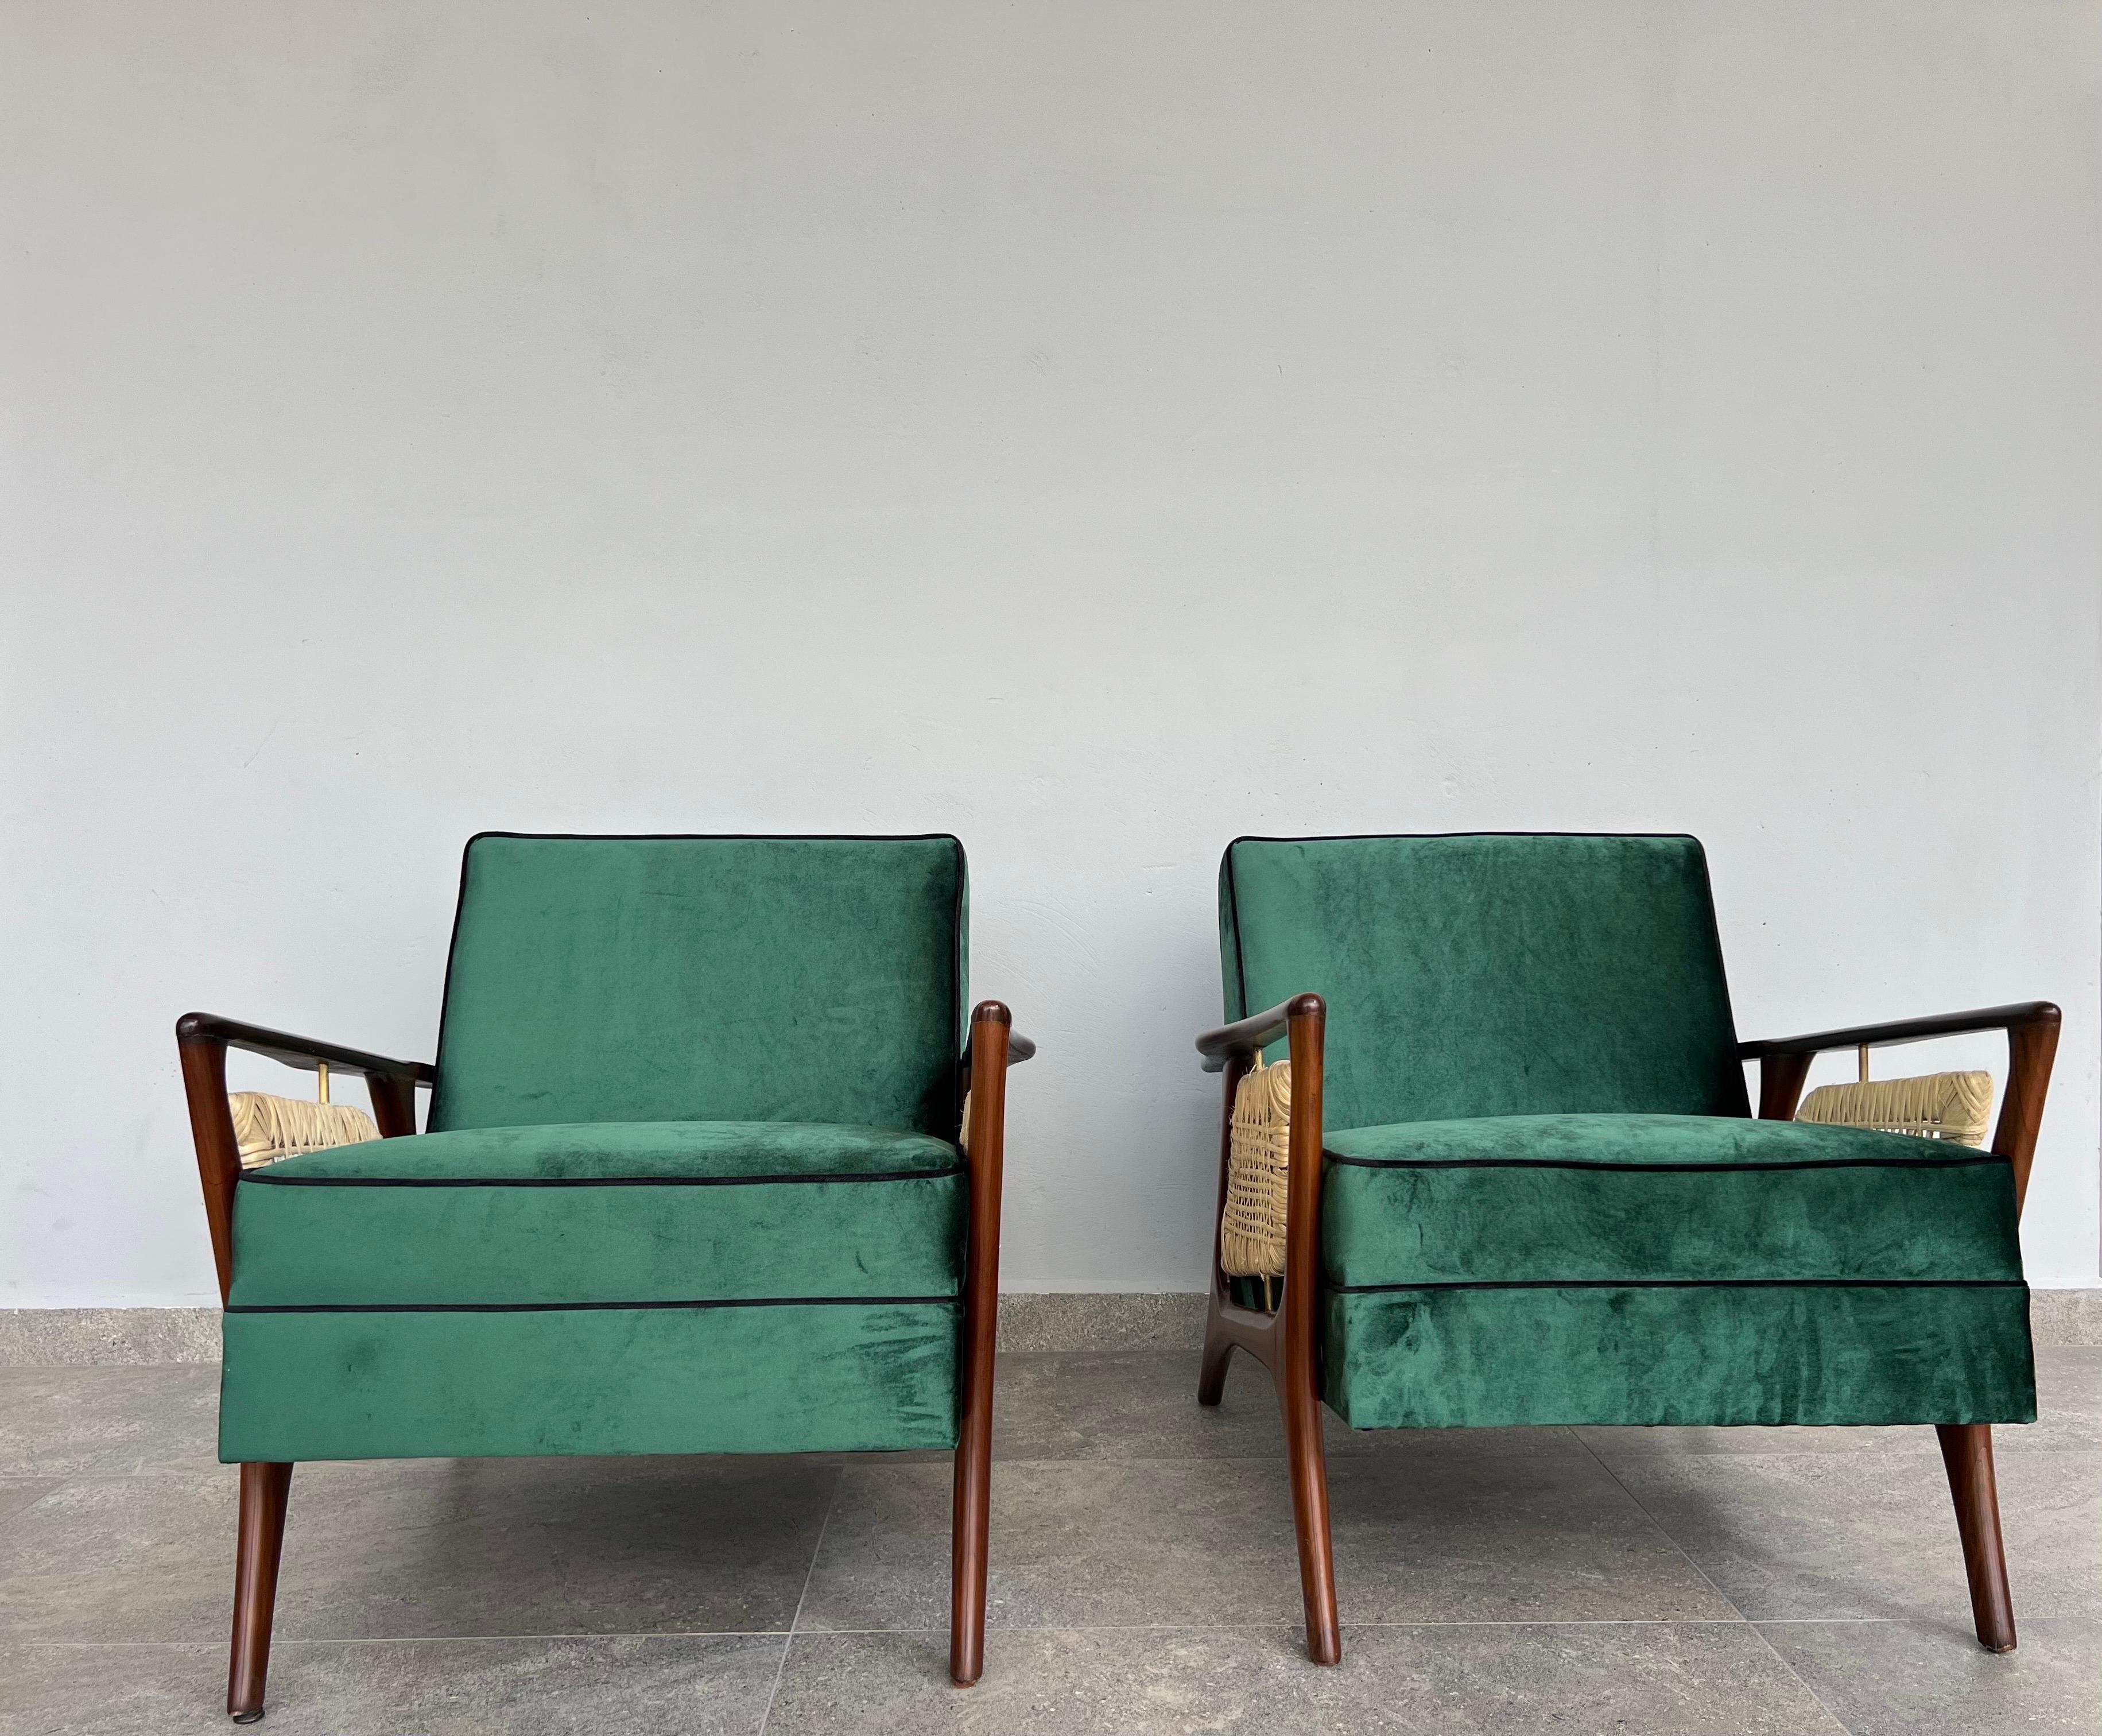 Set of two lounge chairs, sculptural design by the Spanish designer and fervent admirer of Gio Ponti who settled in Mexico, Eugenio Escudero. Escudero is cataloged one of the greatest icons of Mexican modernism.
Some details on one of the arms of